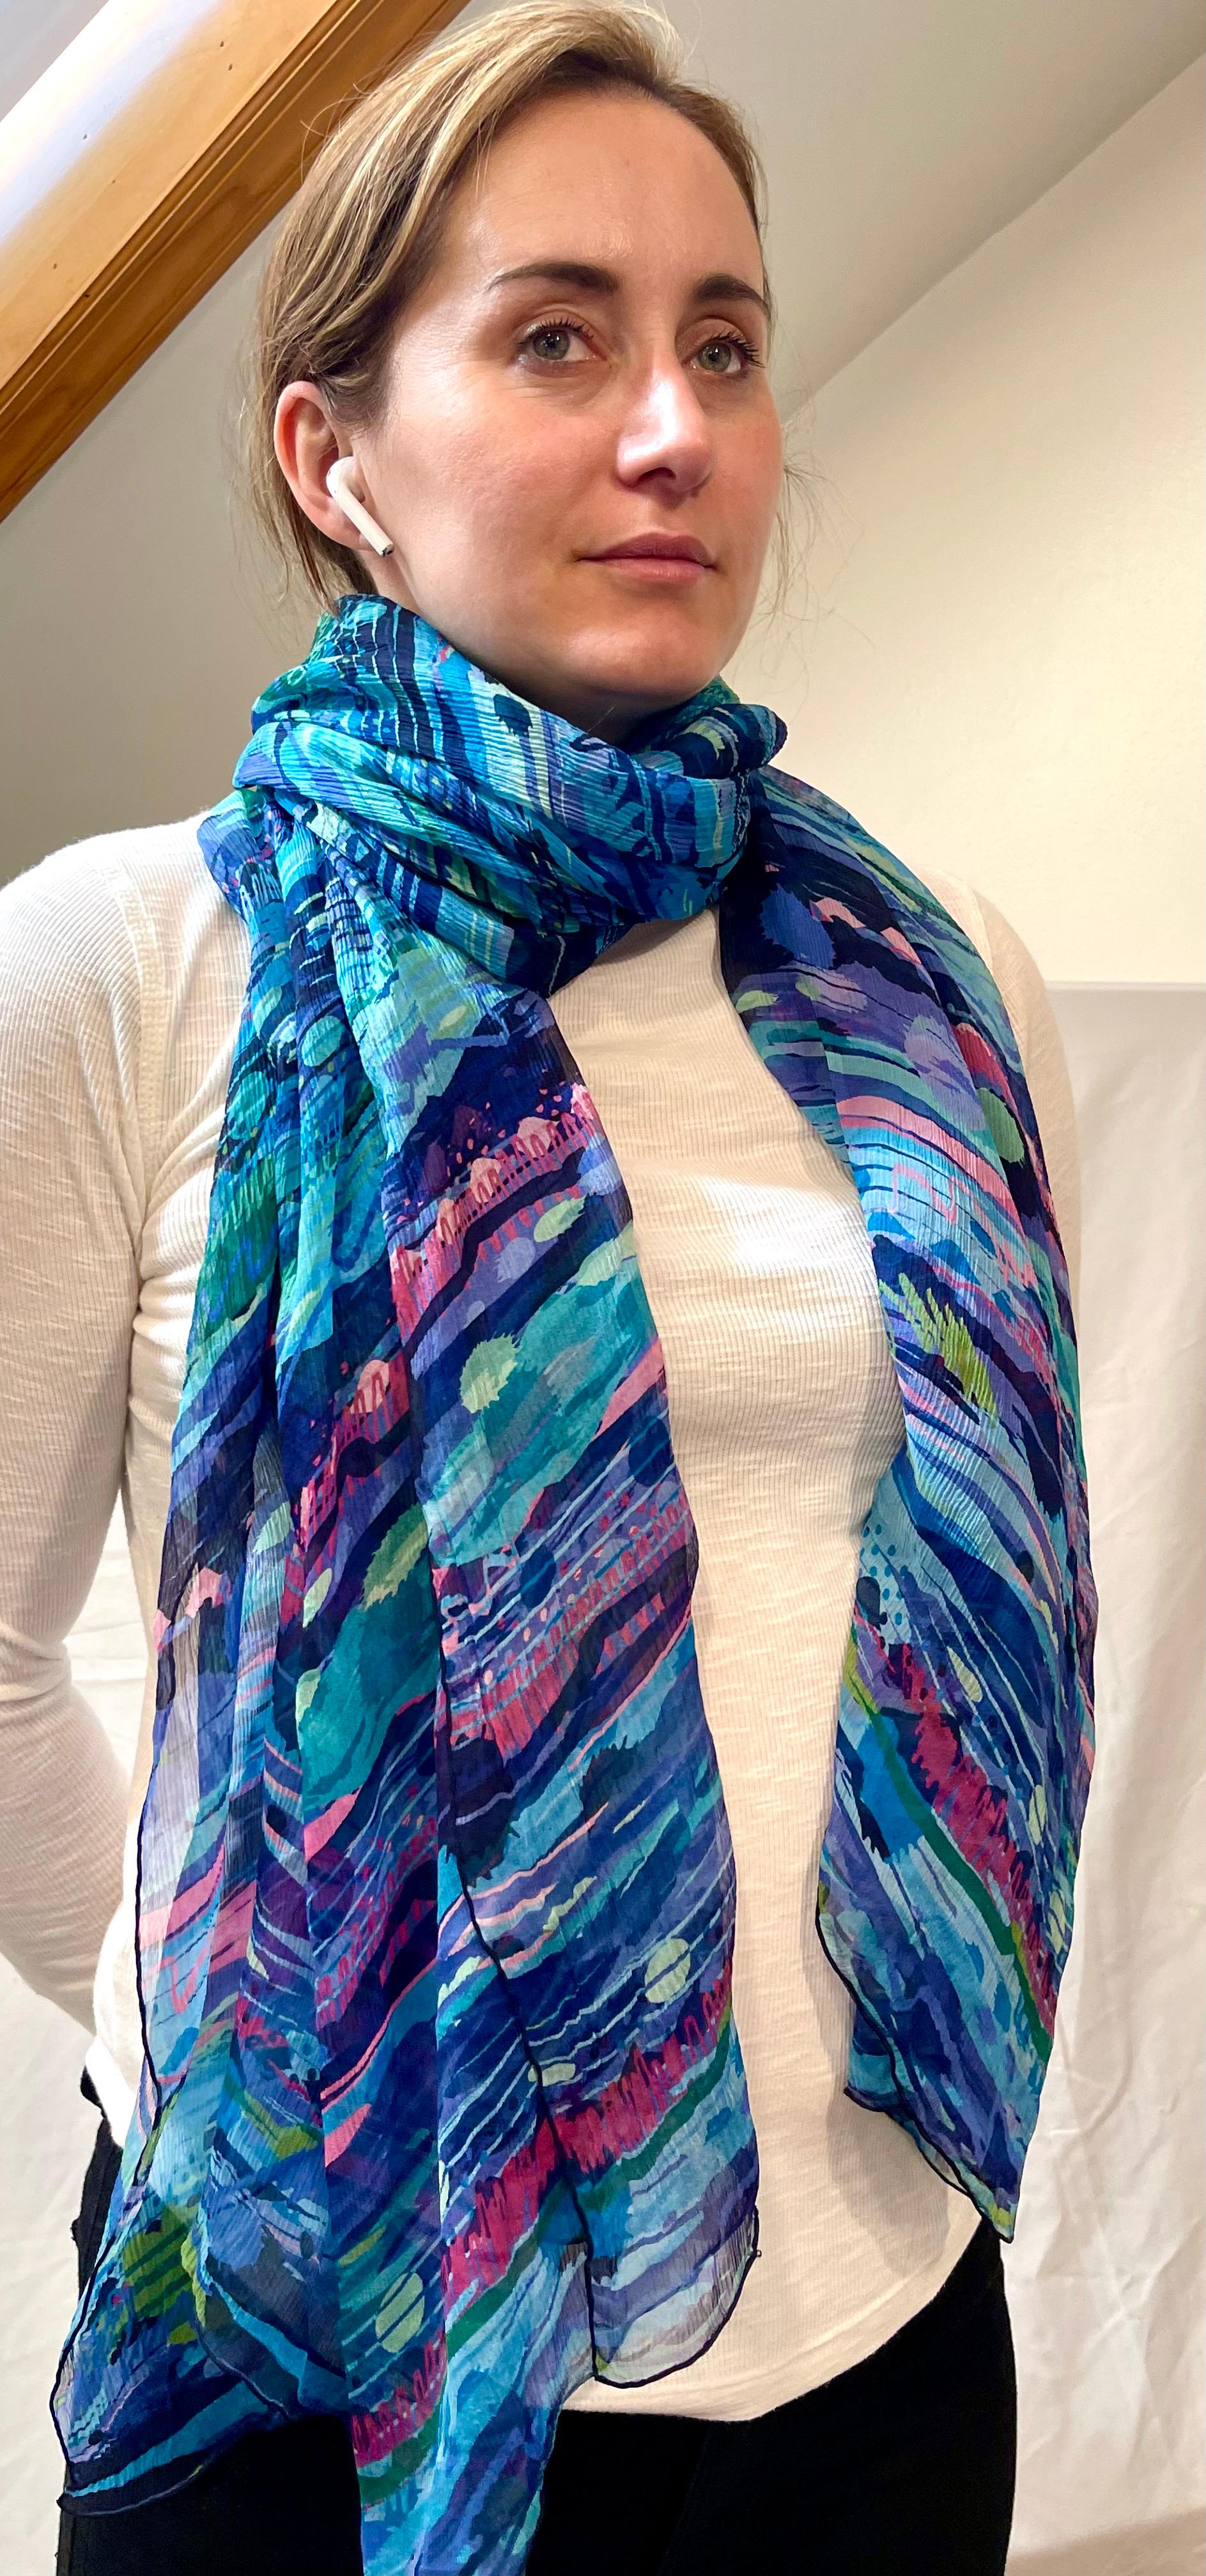 Salvatore Ferragamo Blue Marine  Silk Modern Print Scarf, Extra Long In Excellent Condition For Sale In New York, NY